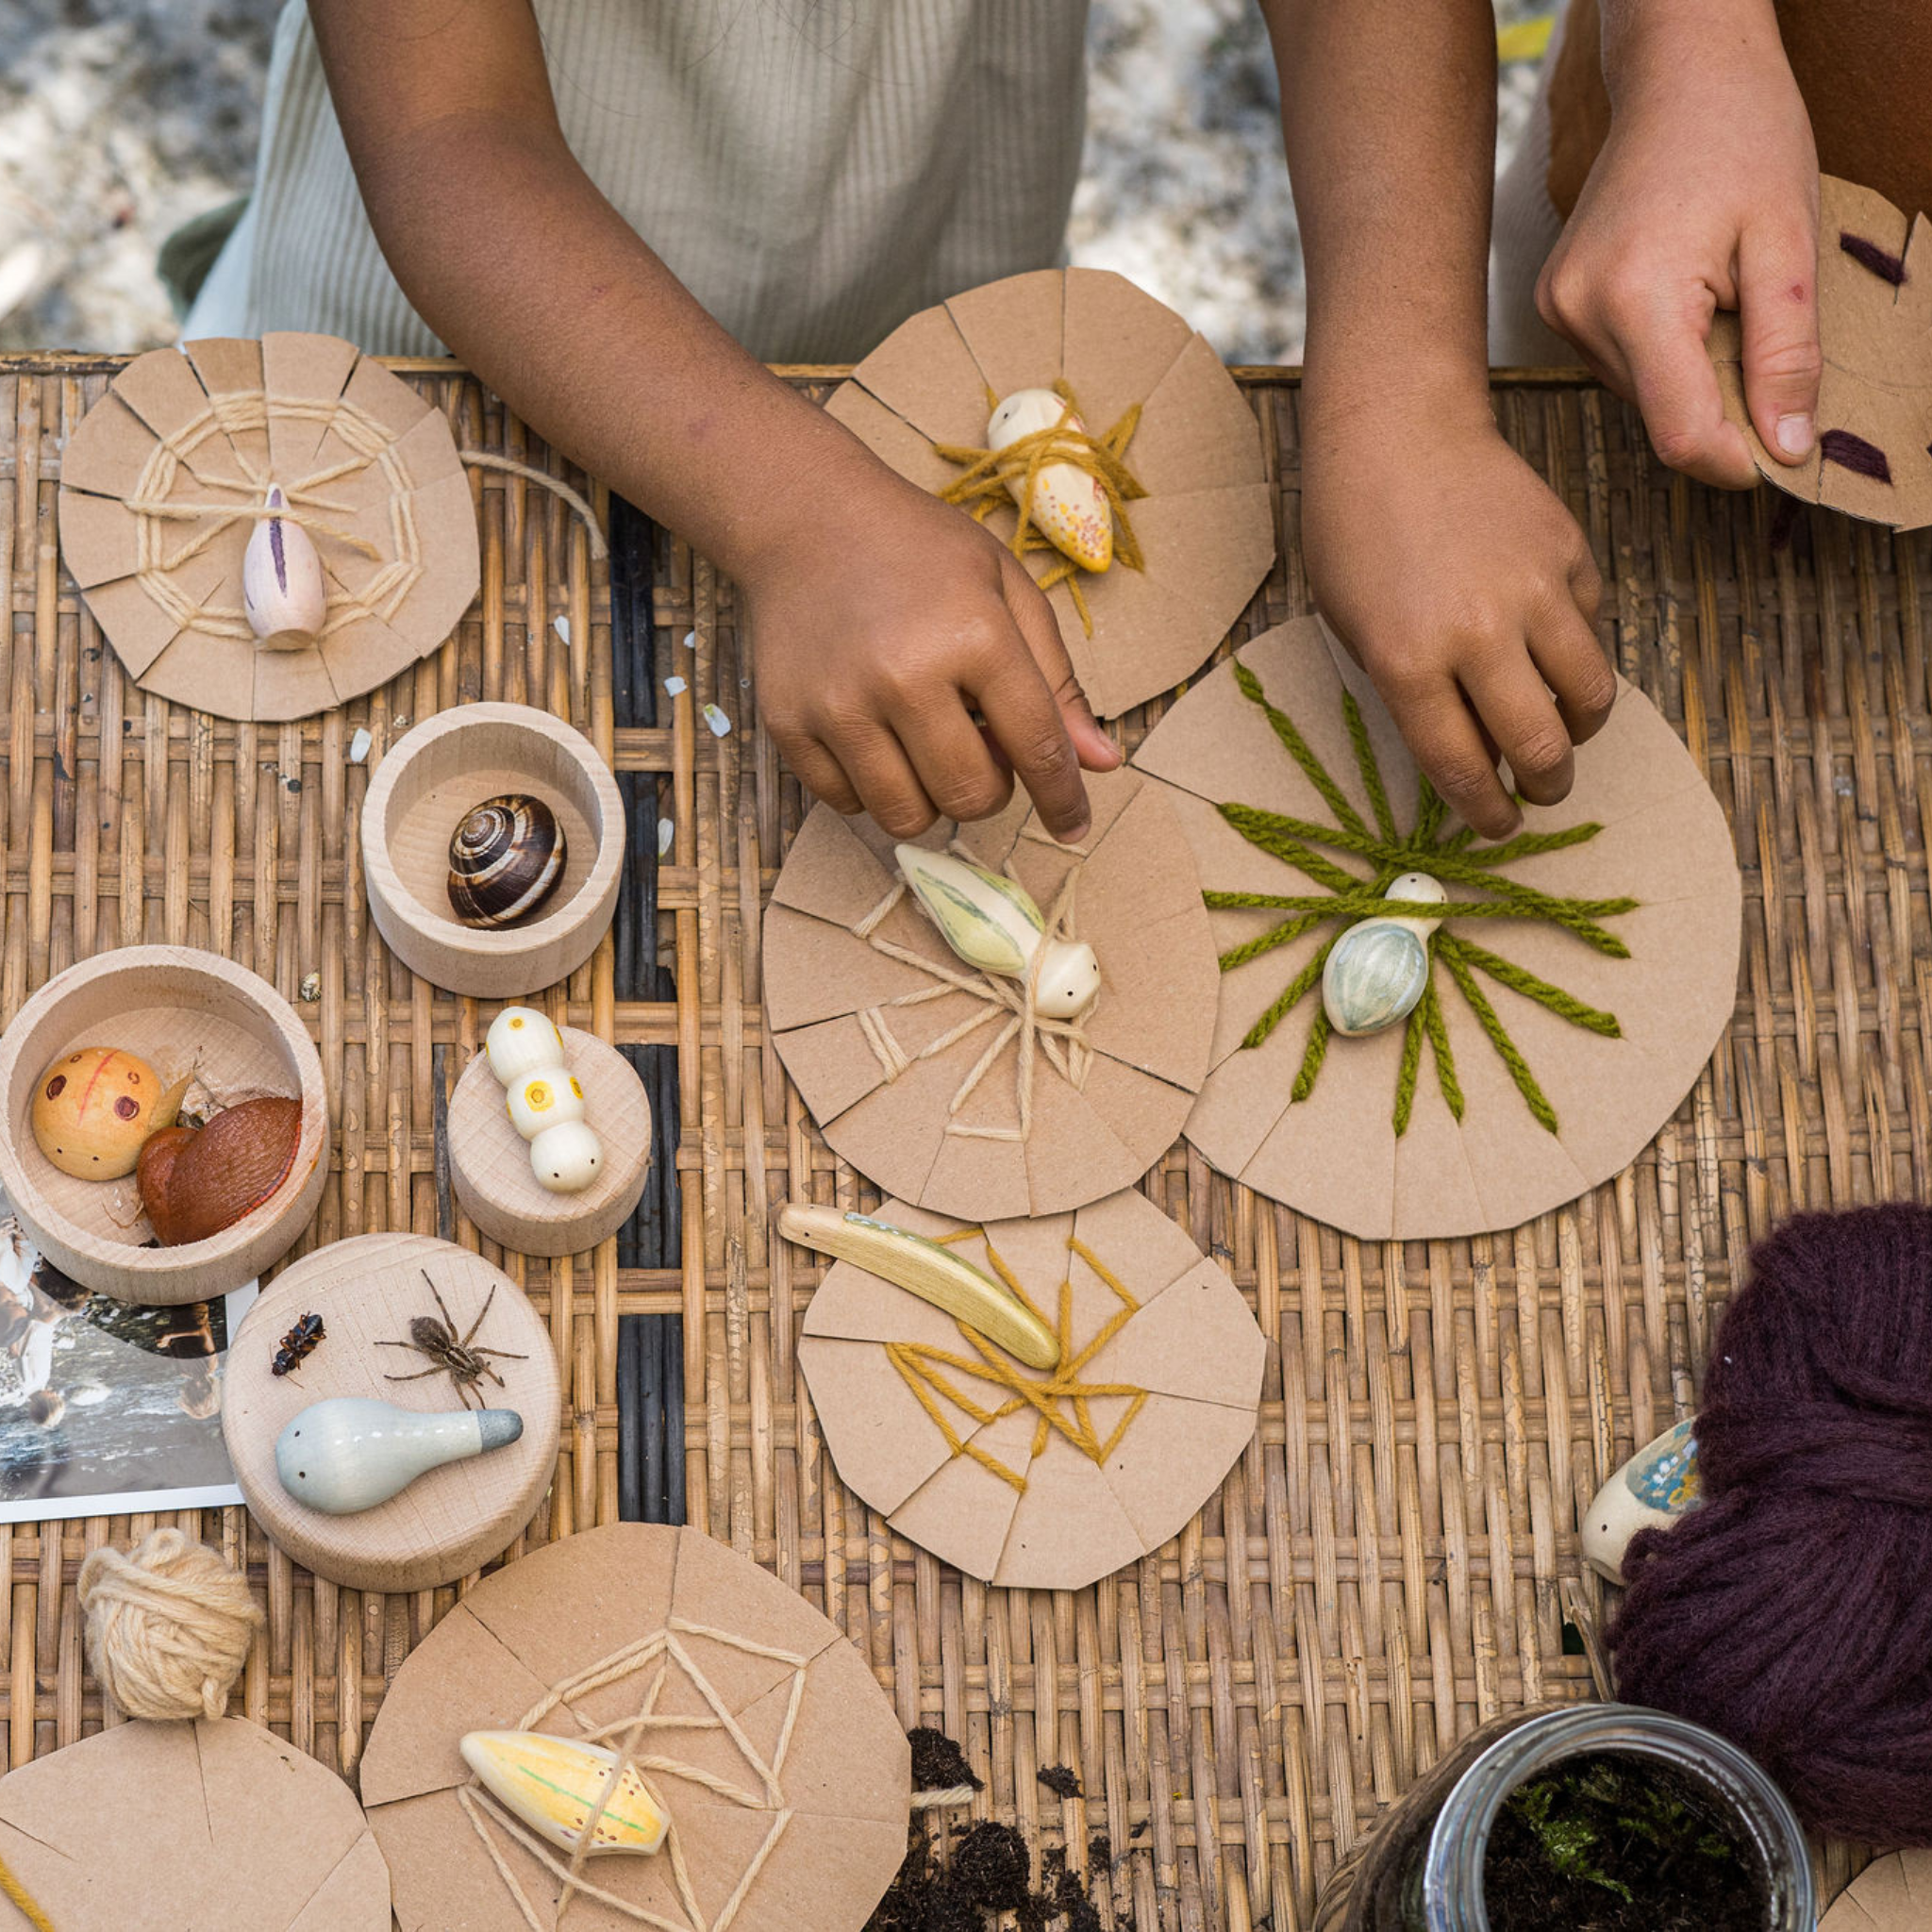 Little Hands Getting Creative With Grapat Wild Wooden Set